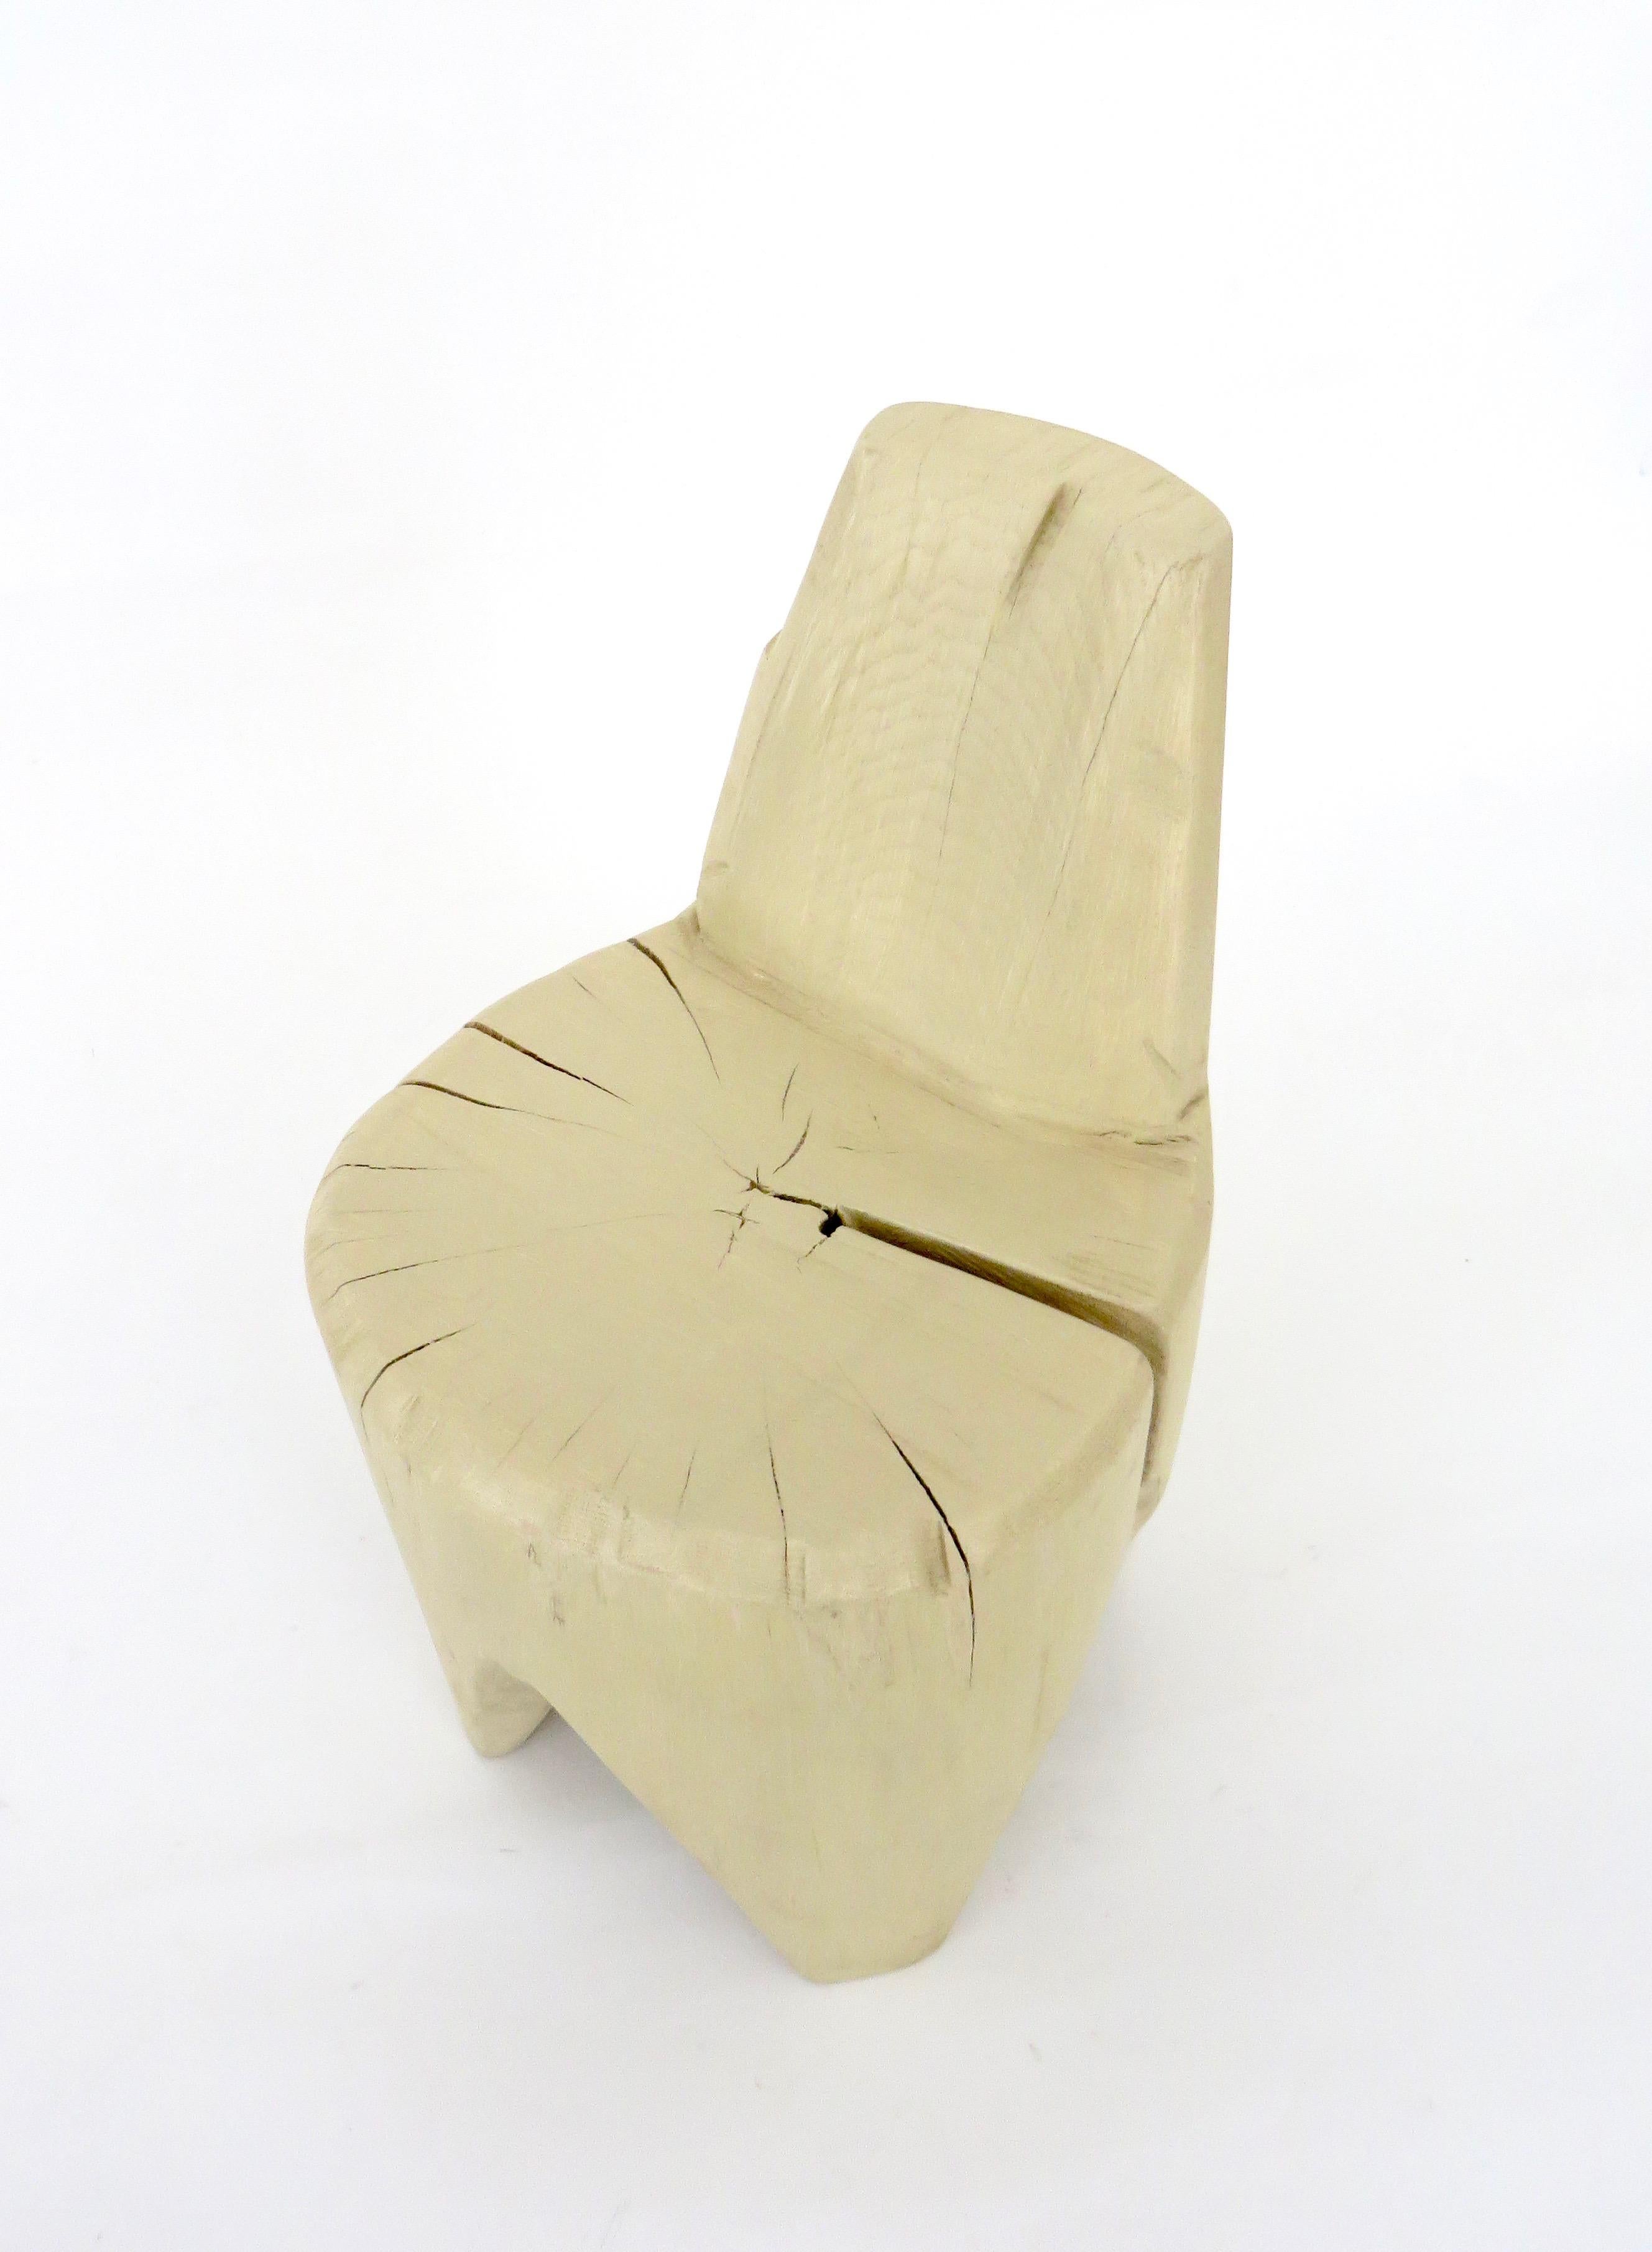 Hannah Vaughan Contemporary Carved Sculptural Chair, 2019 2